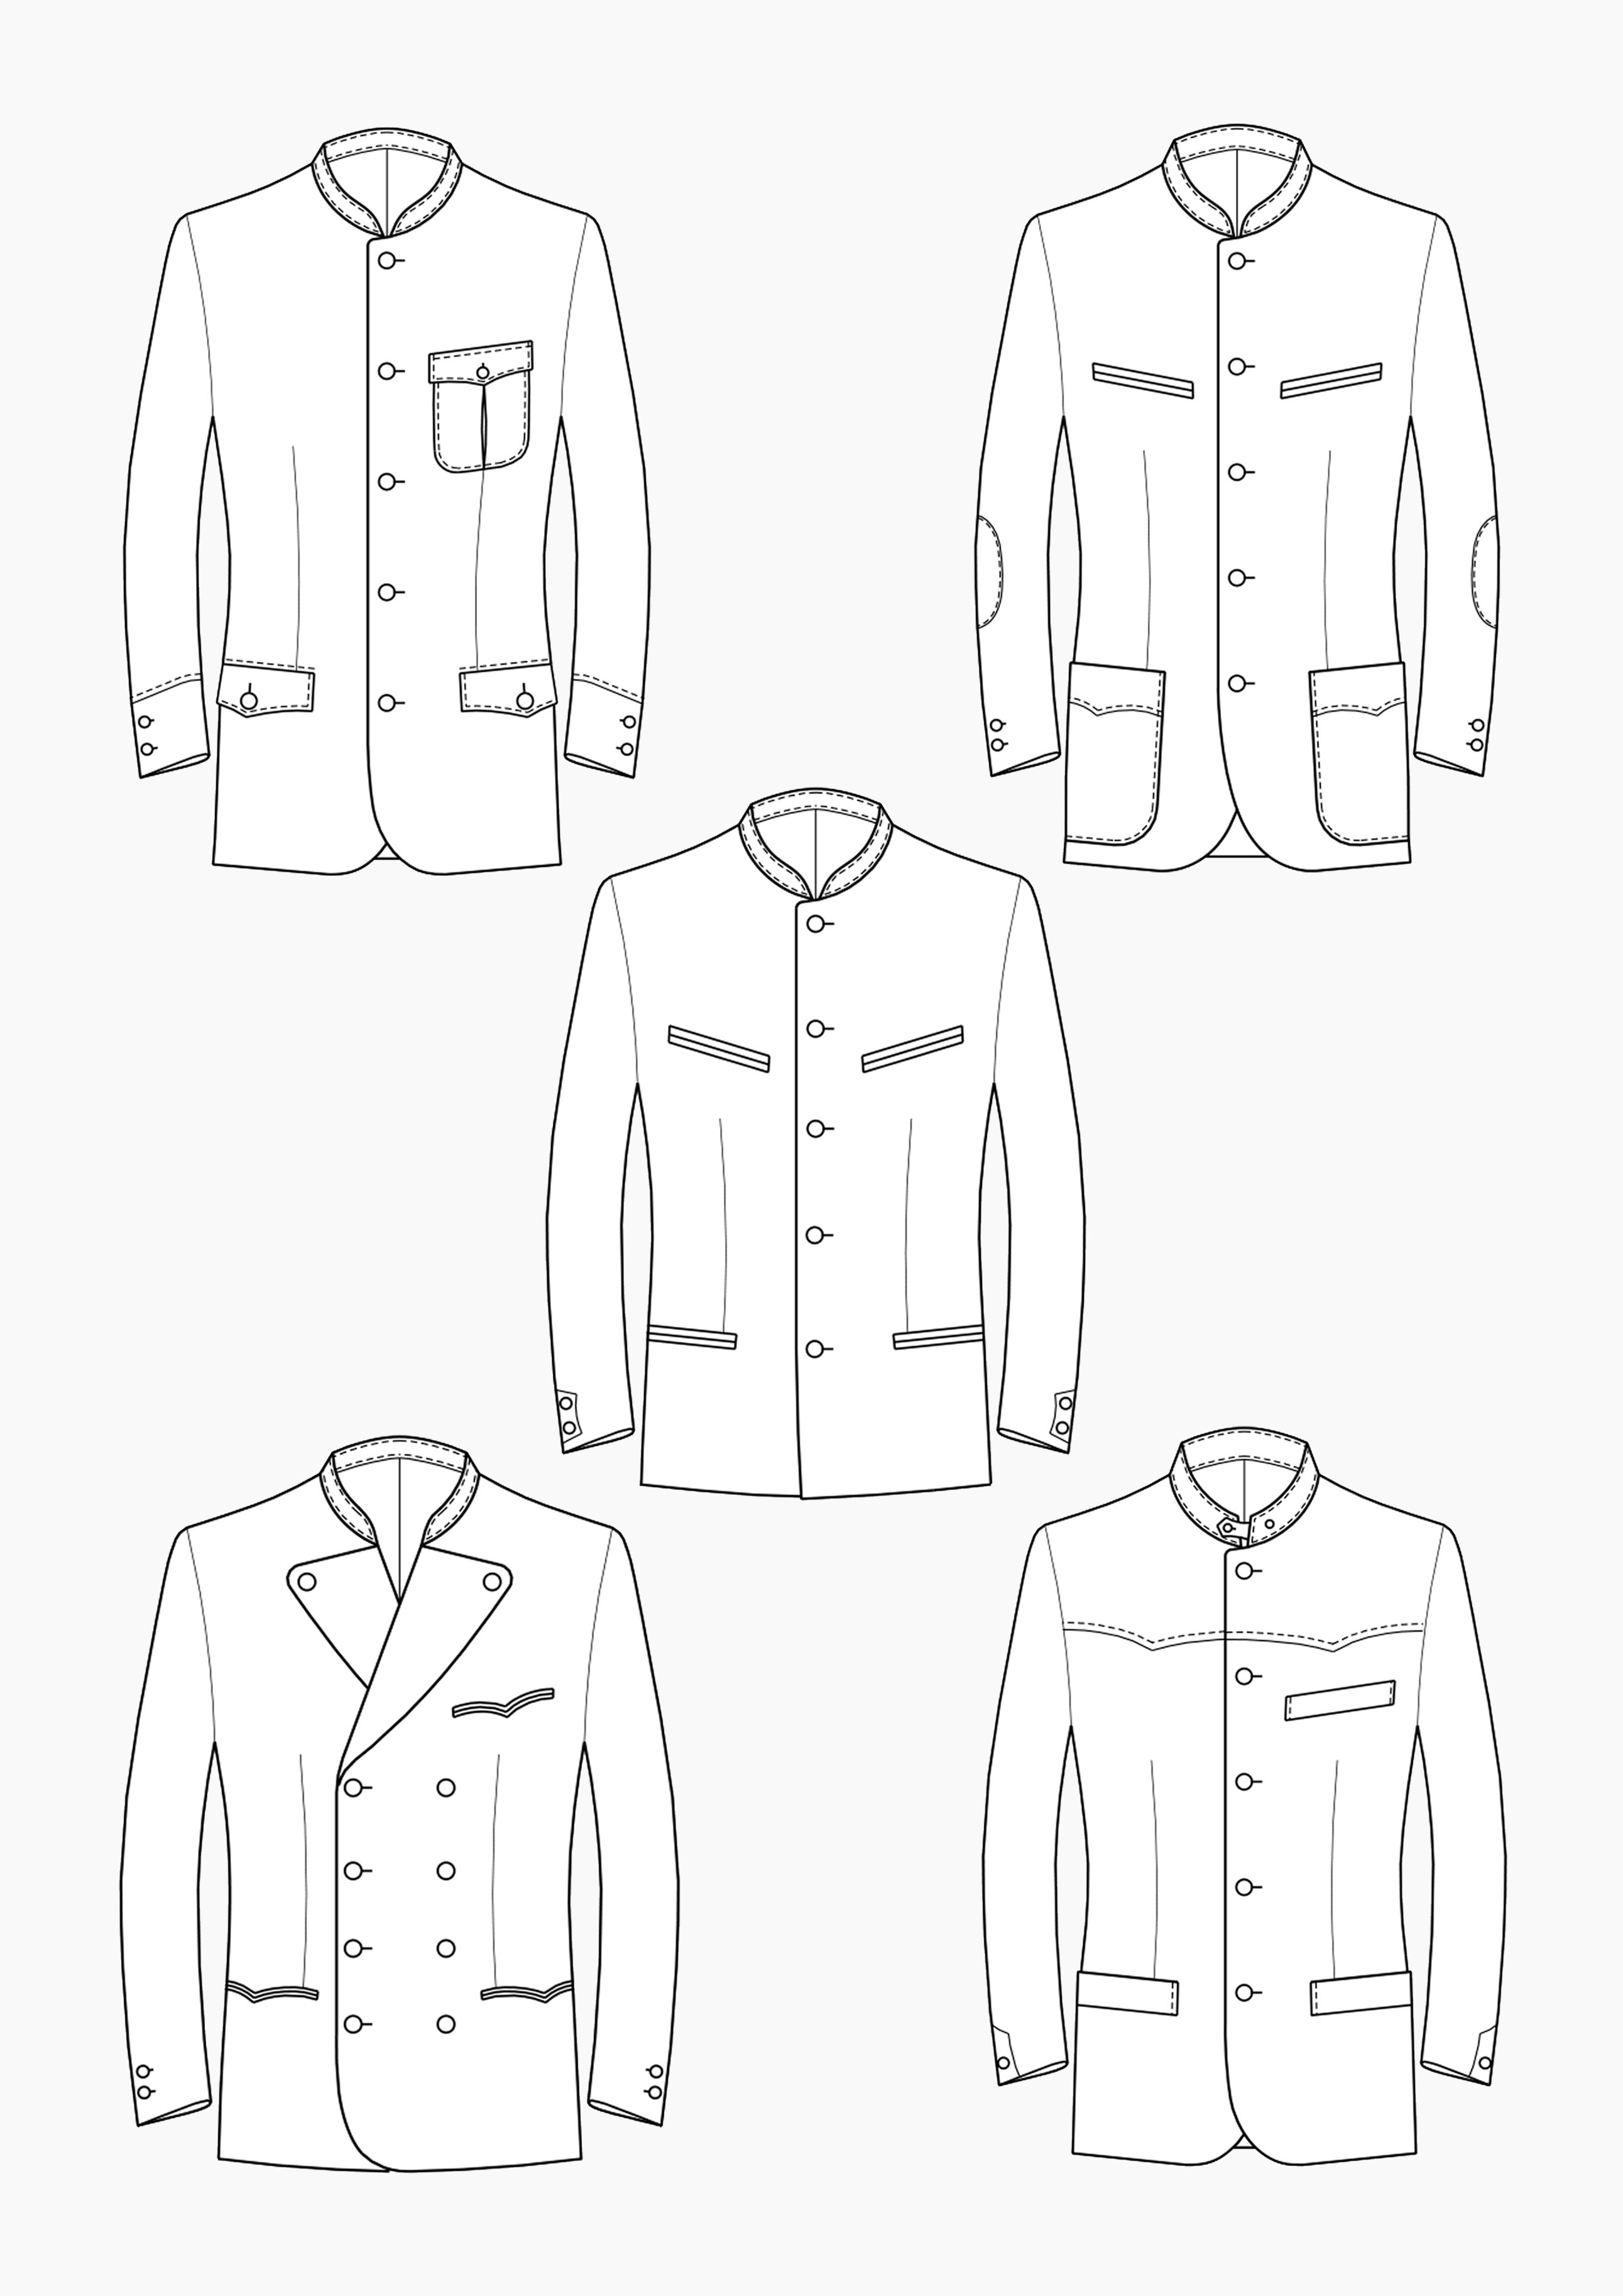 Product: Pattern Making Traditional Bavarian Jackets for Men